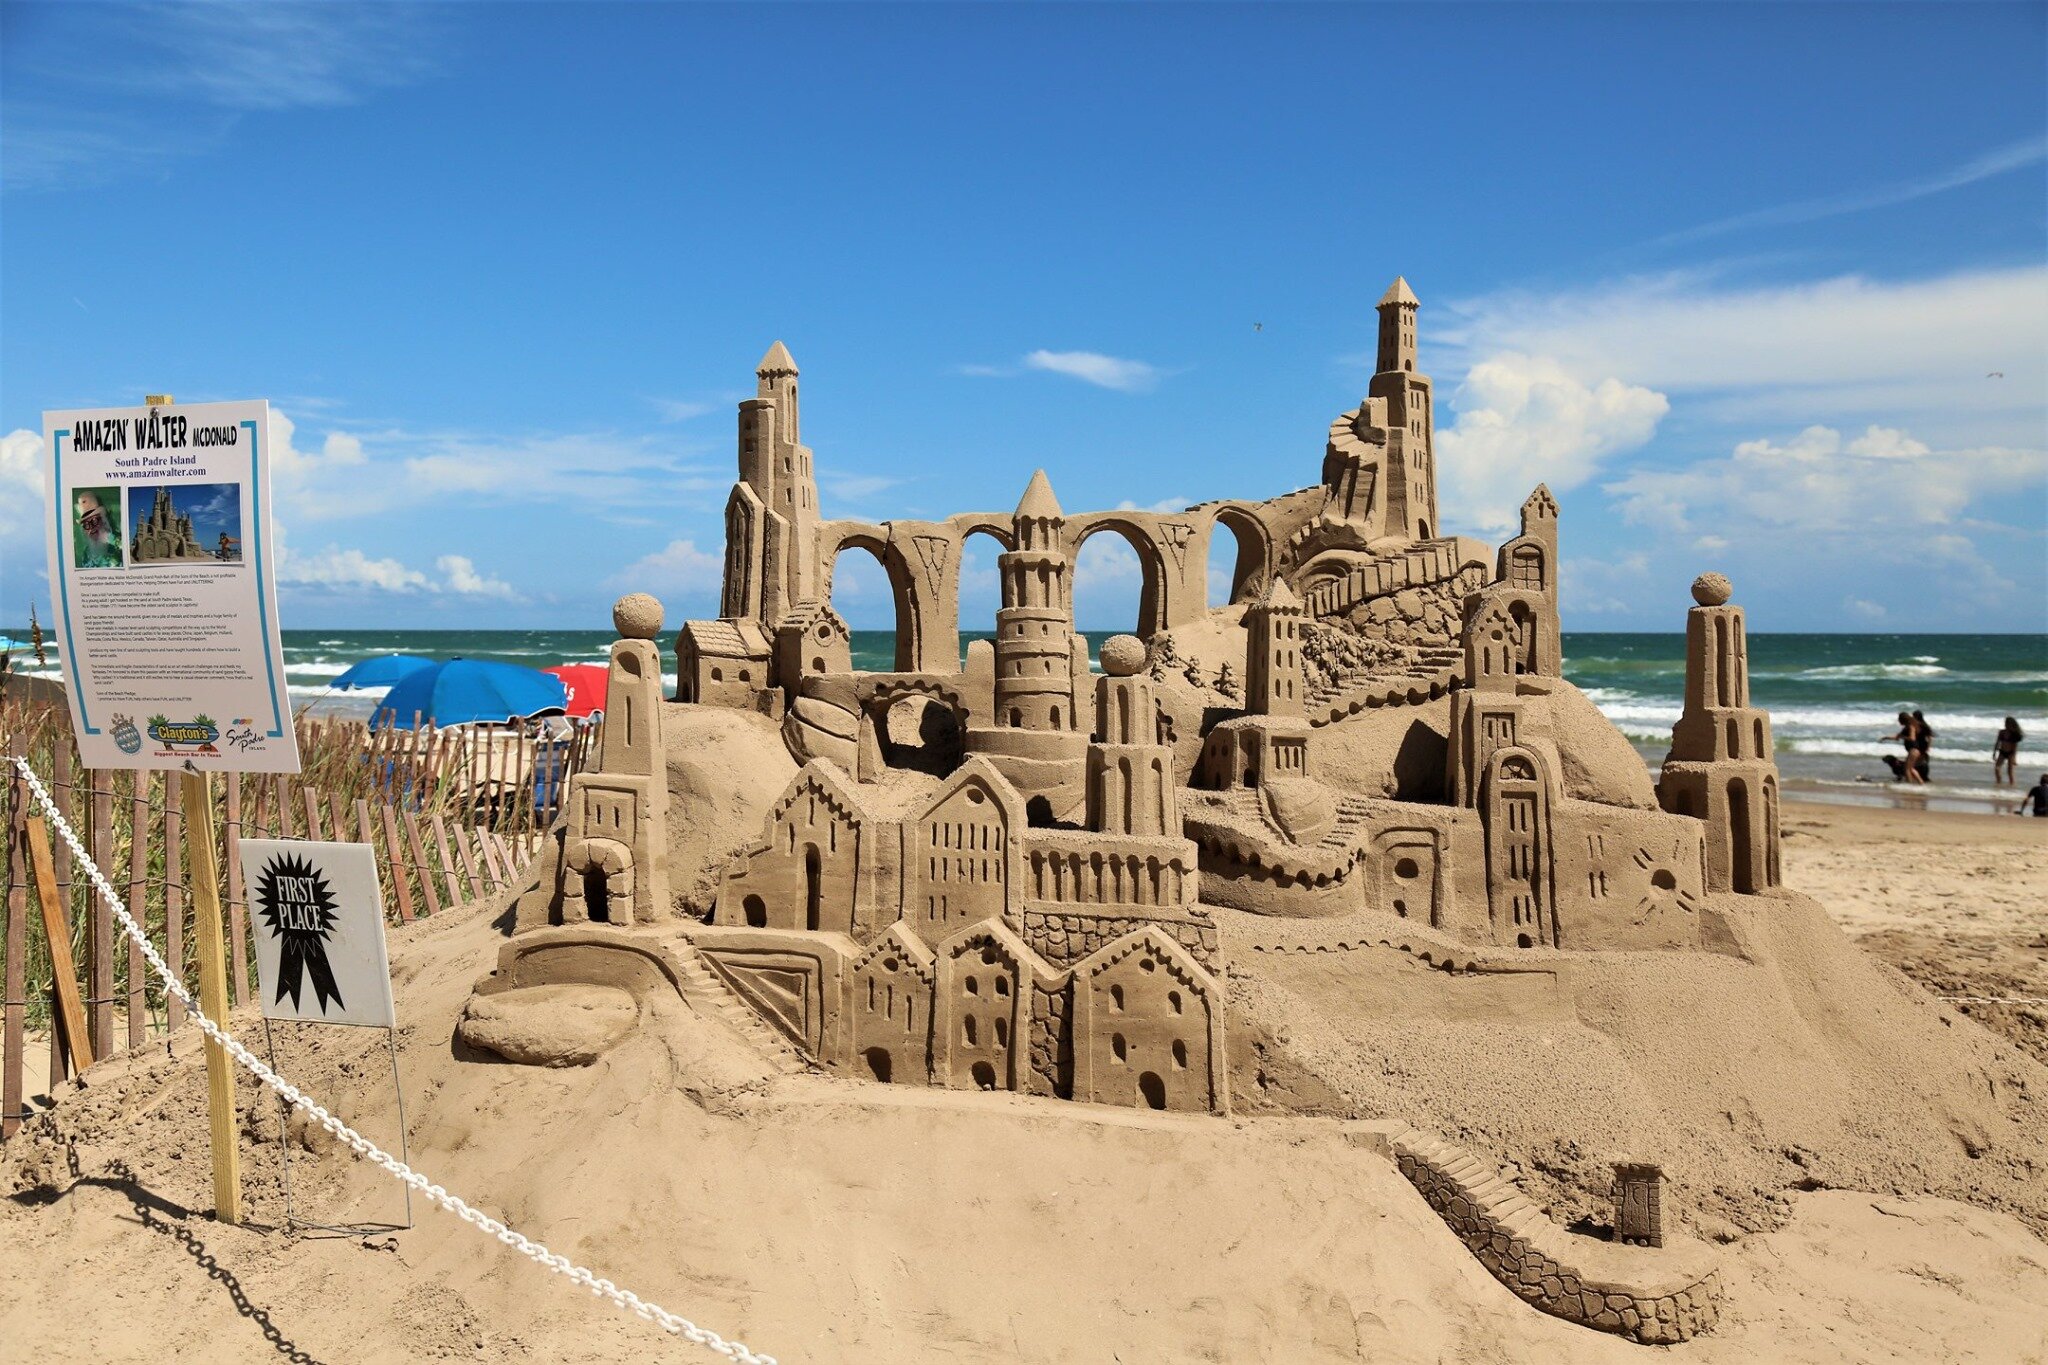 Sandcastle Days - South Padre Island Sept 27th - Oct 3rd 2021